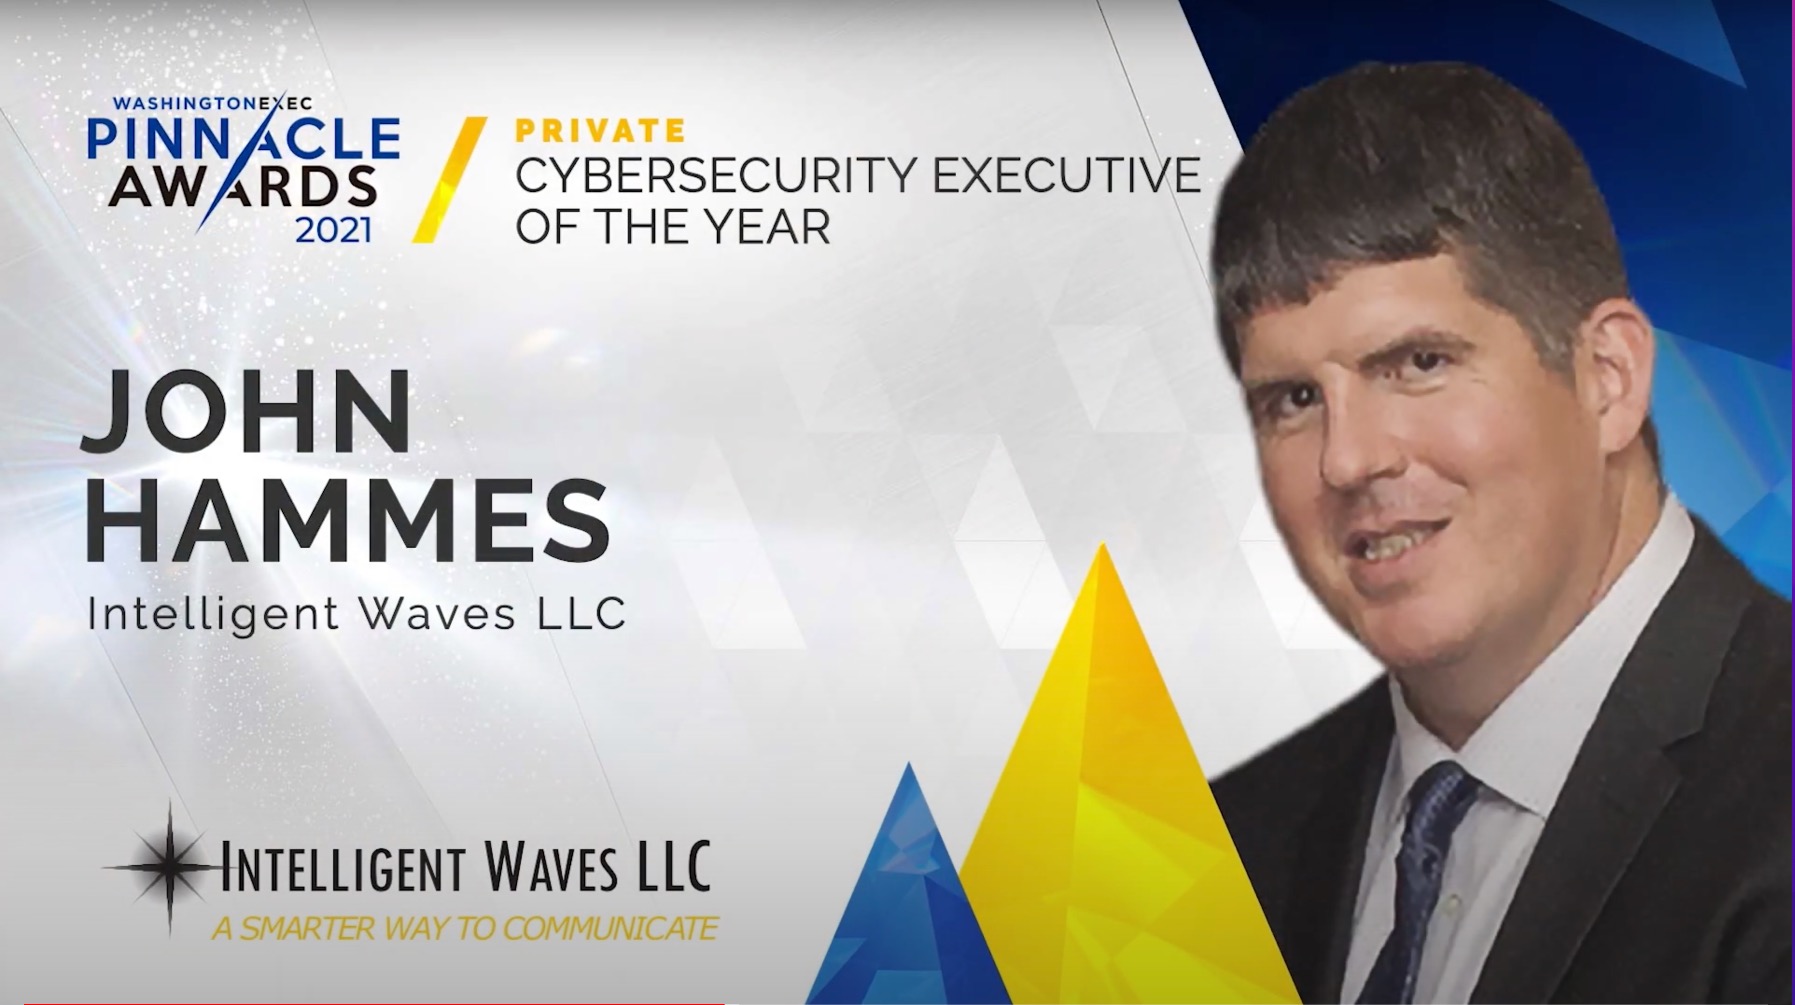 Cybersecurity - Congratulations to John Hammes from Intelligent Waves LLC on winning the award for Cybersecurity Executive of the Year in the Private Sector